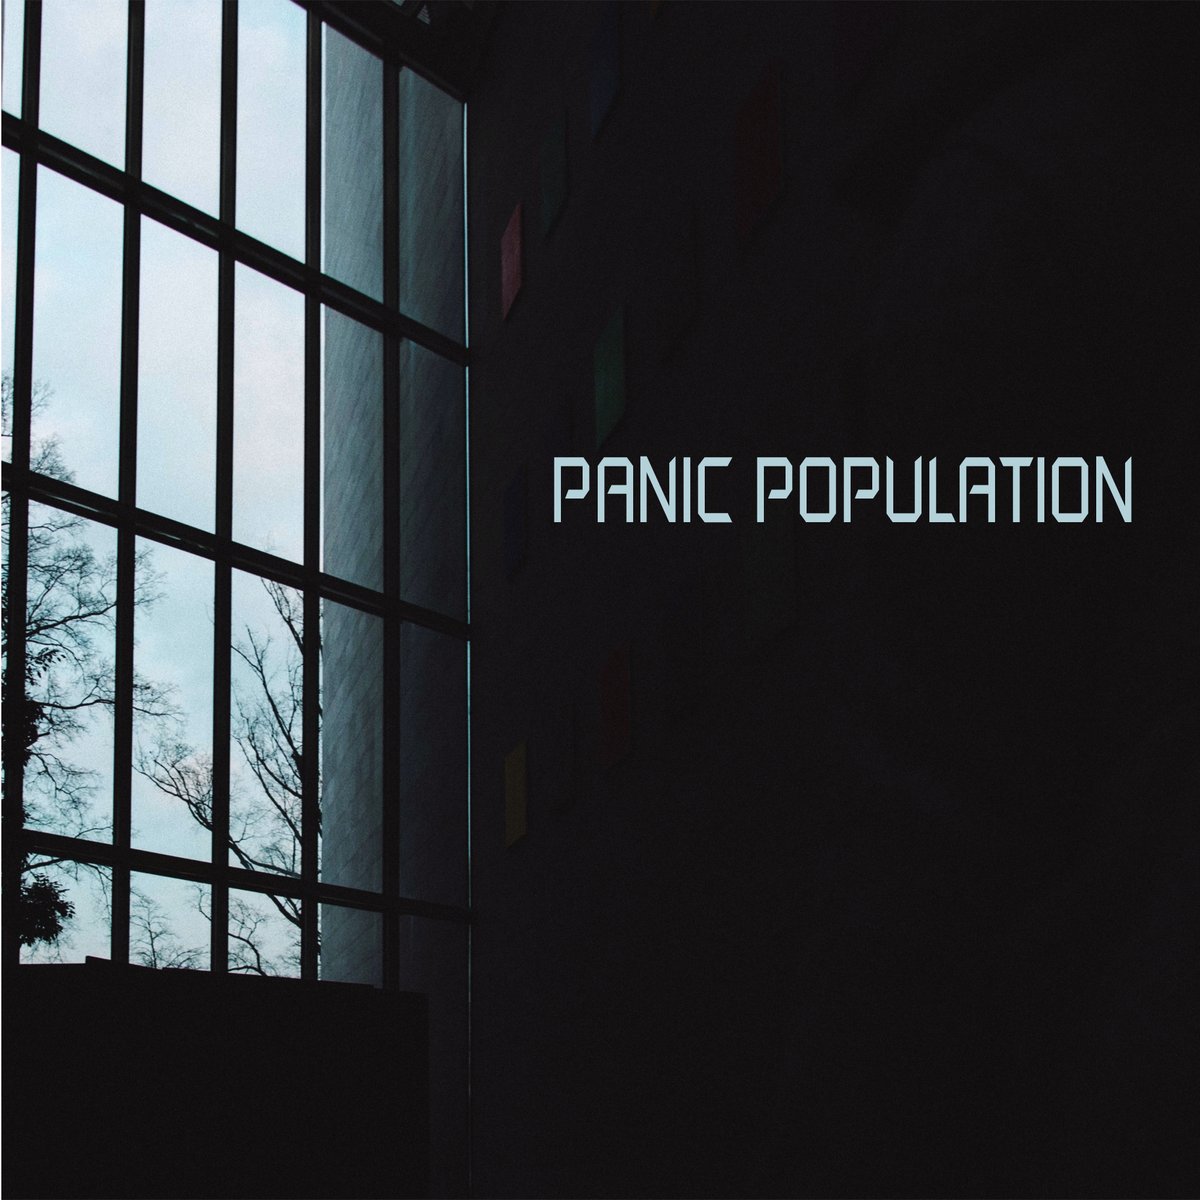 Hello folks, Pete here. Update on my new psych rock project @panicpopulation First video will go up next week!. EP out Oct. 1st! for bandcamp Friday